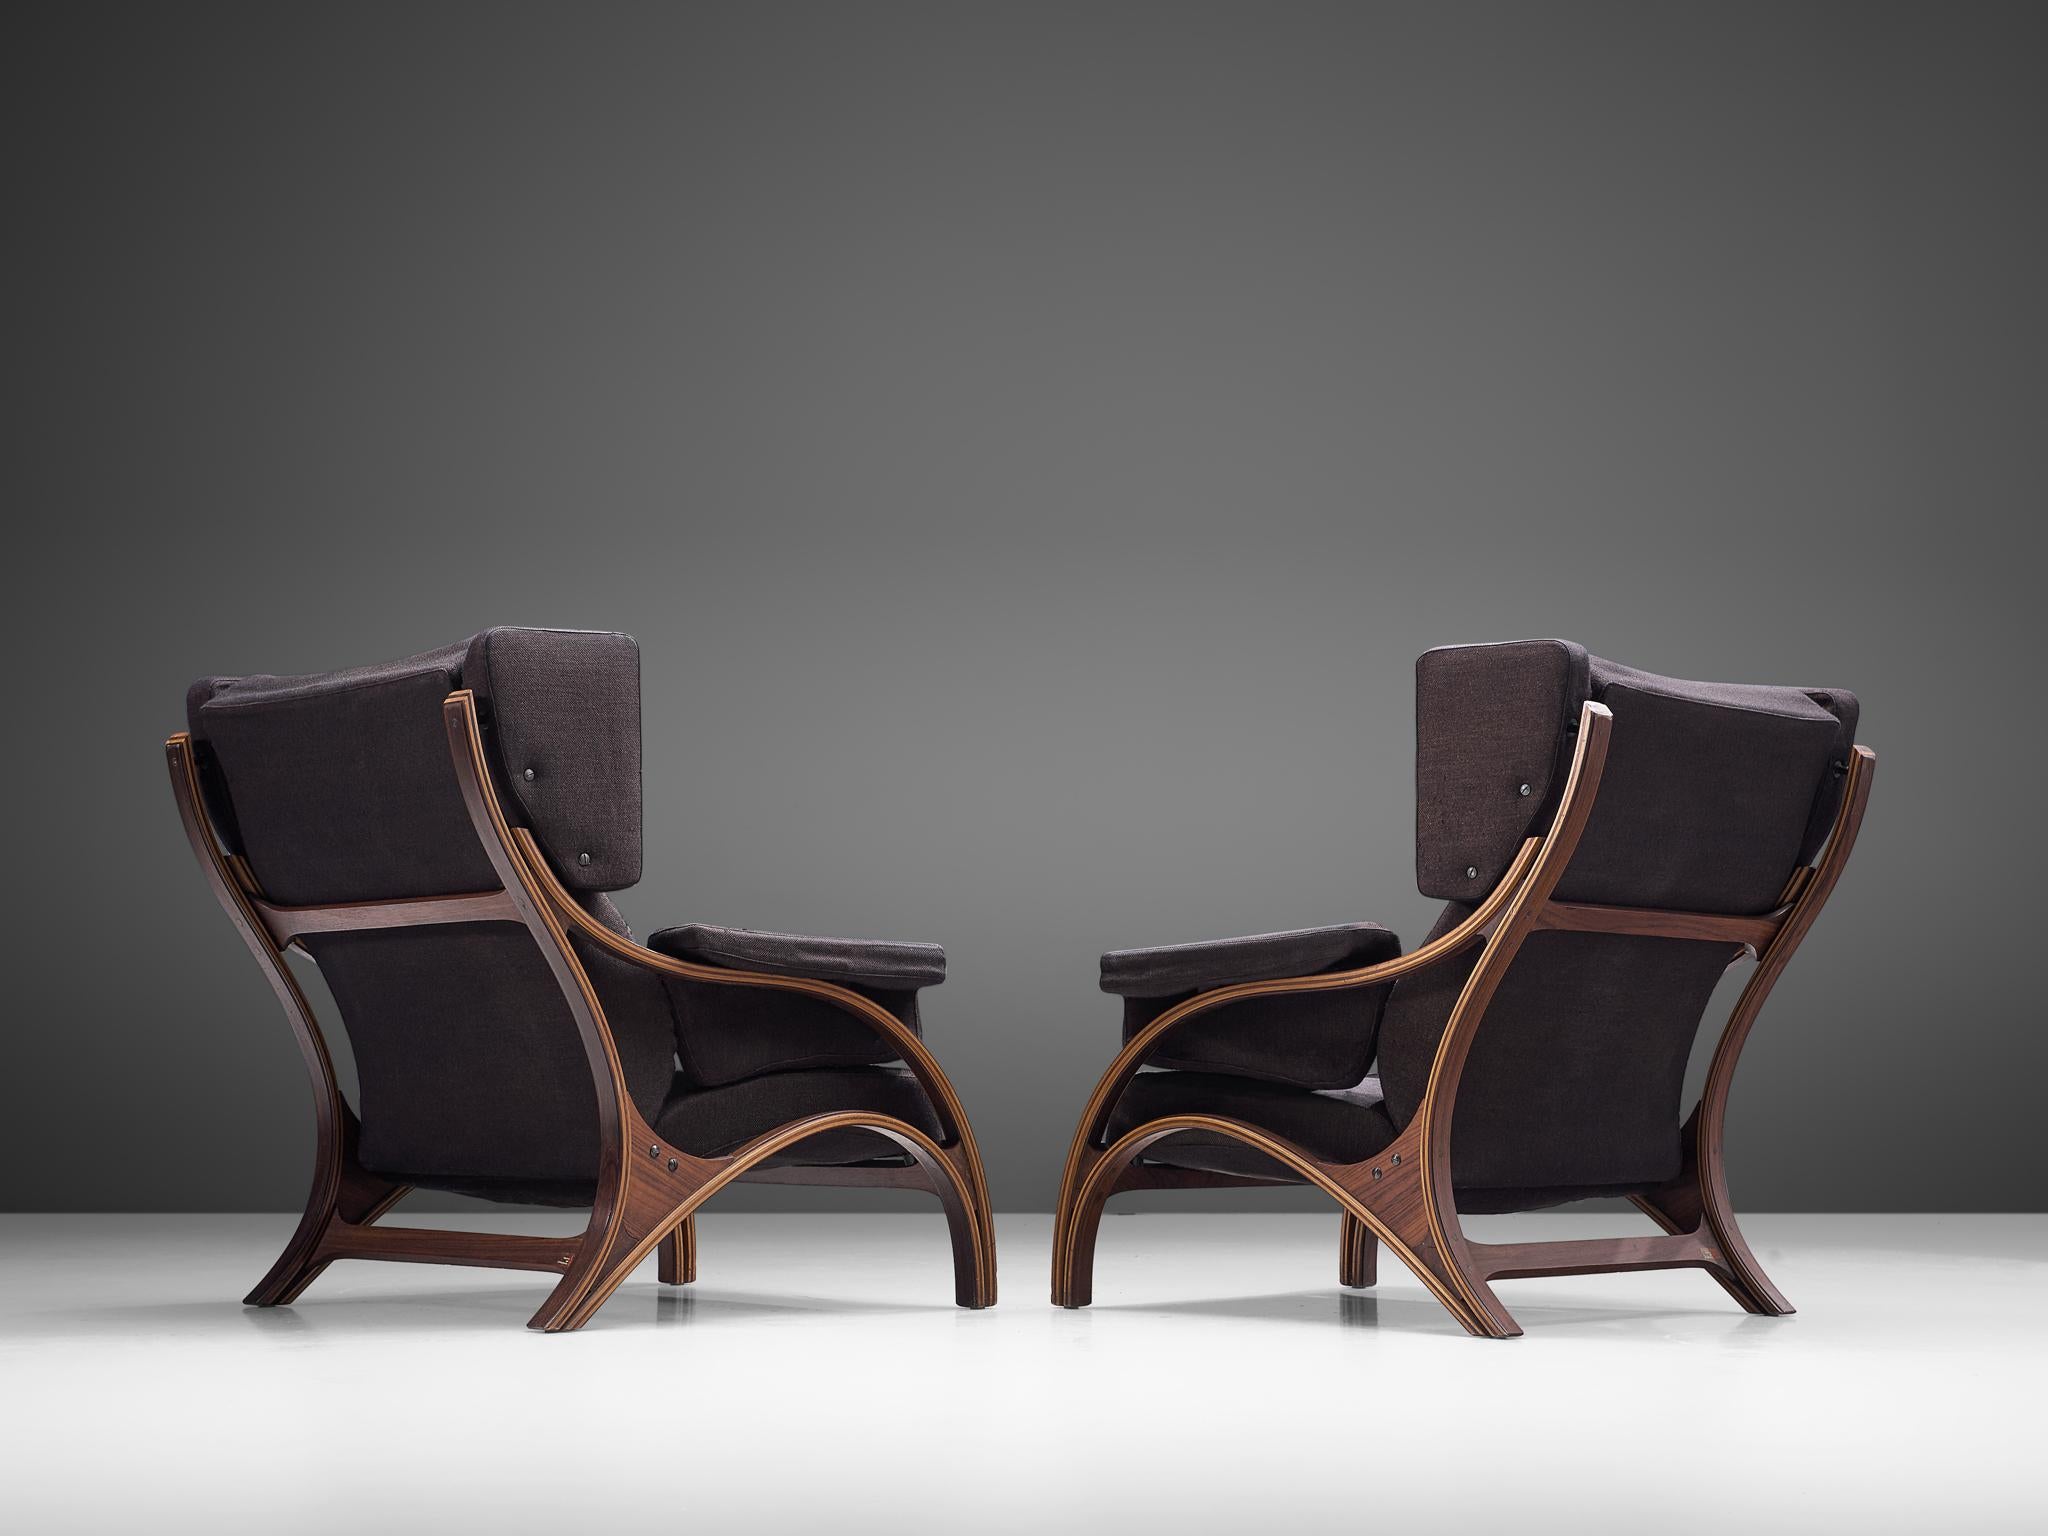 Giampiero Vitelli, pair of lounge chairs to be reupholstered, rosewood and fabric, Italy, 1960s.

Set of Italian wingback chairs that feature curves and gracious forms. The most interesting feature is the rosewood frame with its fluid lines. The